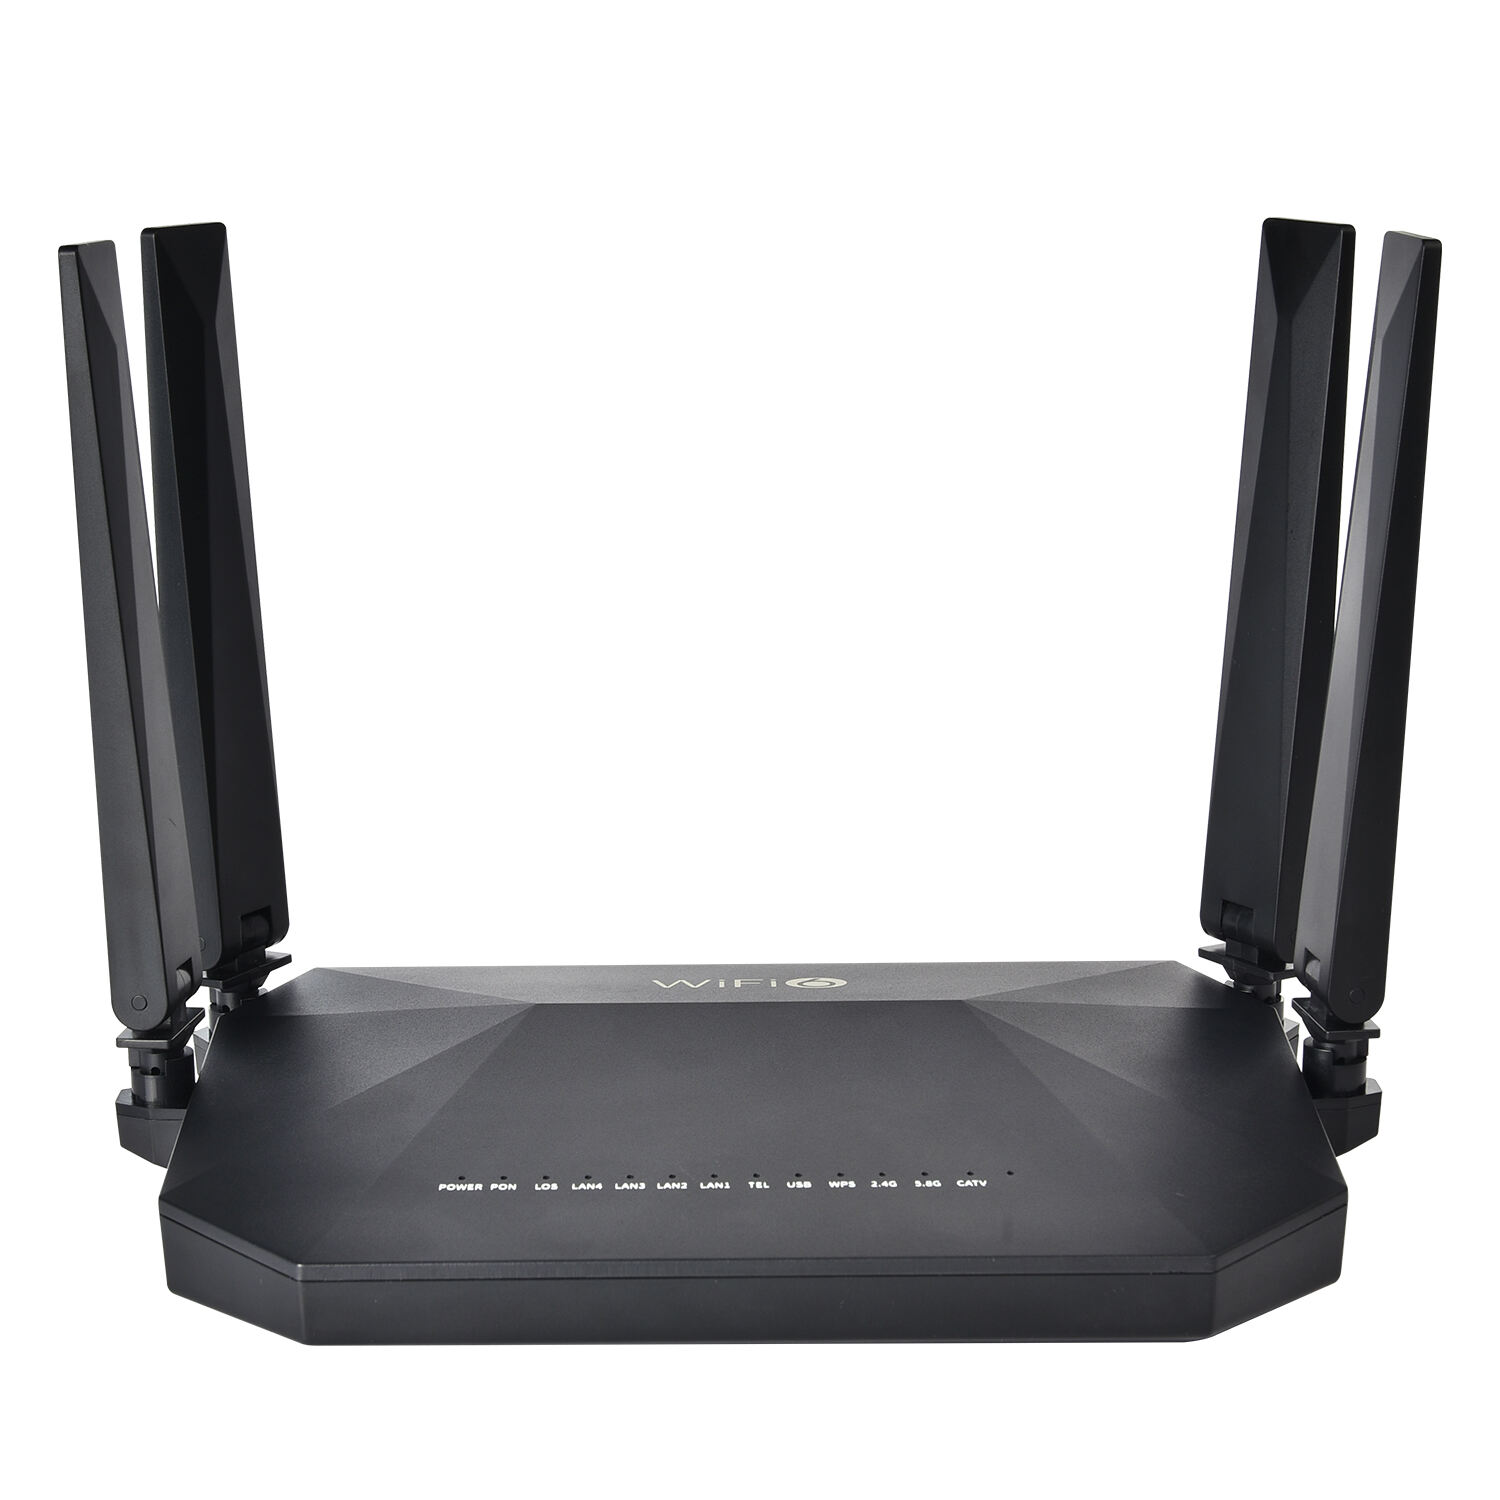 WIFI6 Compatibility And Secure Data Access BT-G710AX WIFI6 xPON ONU